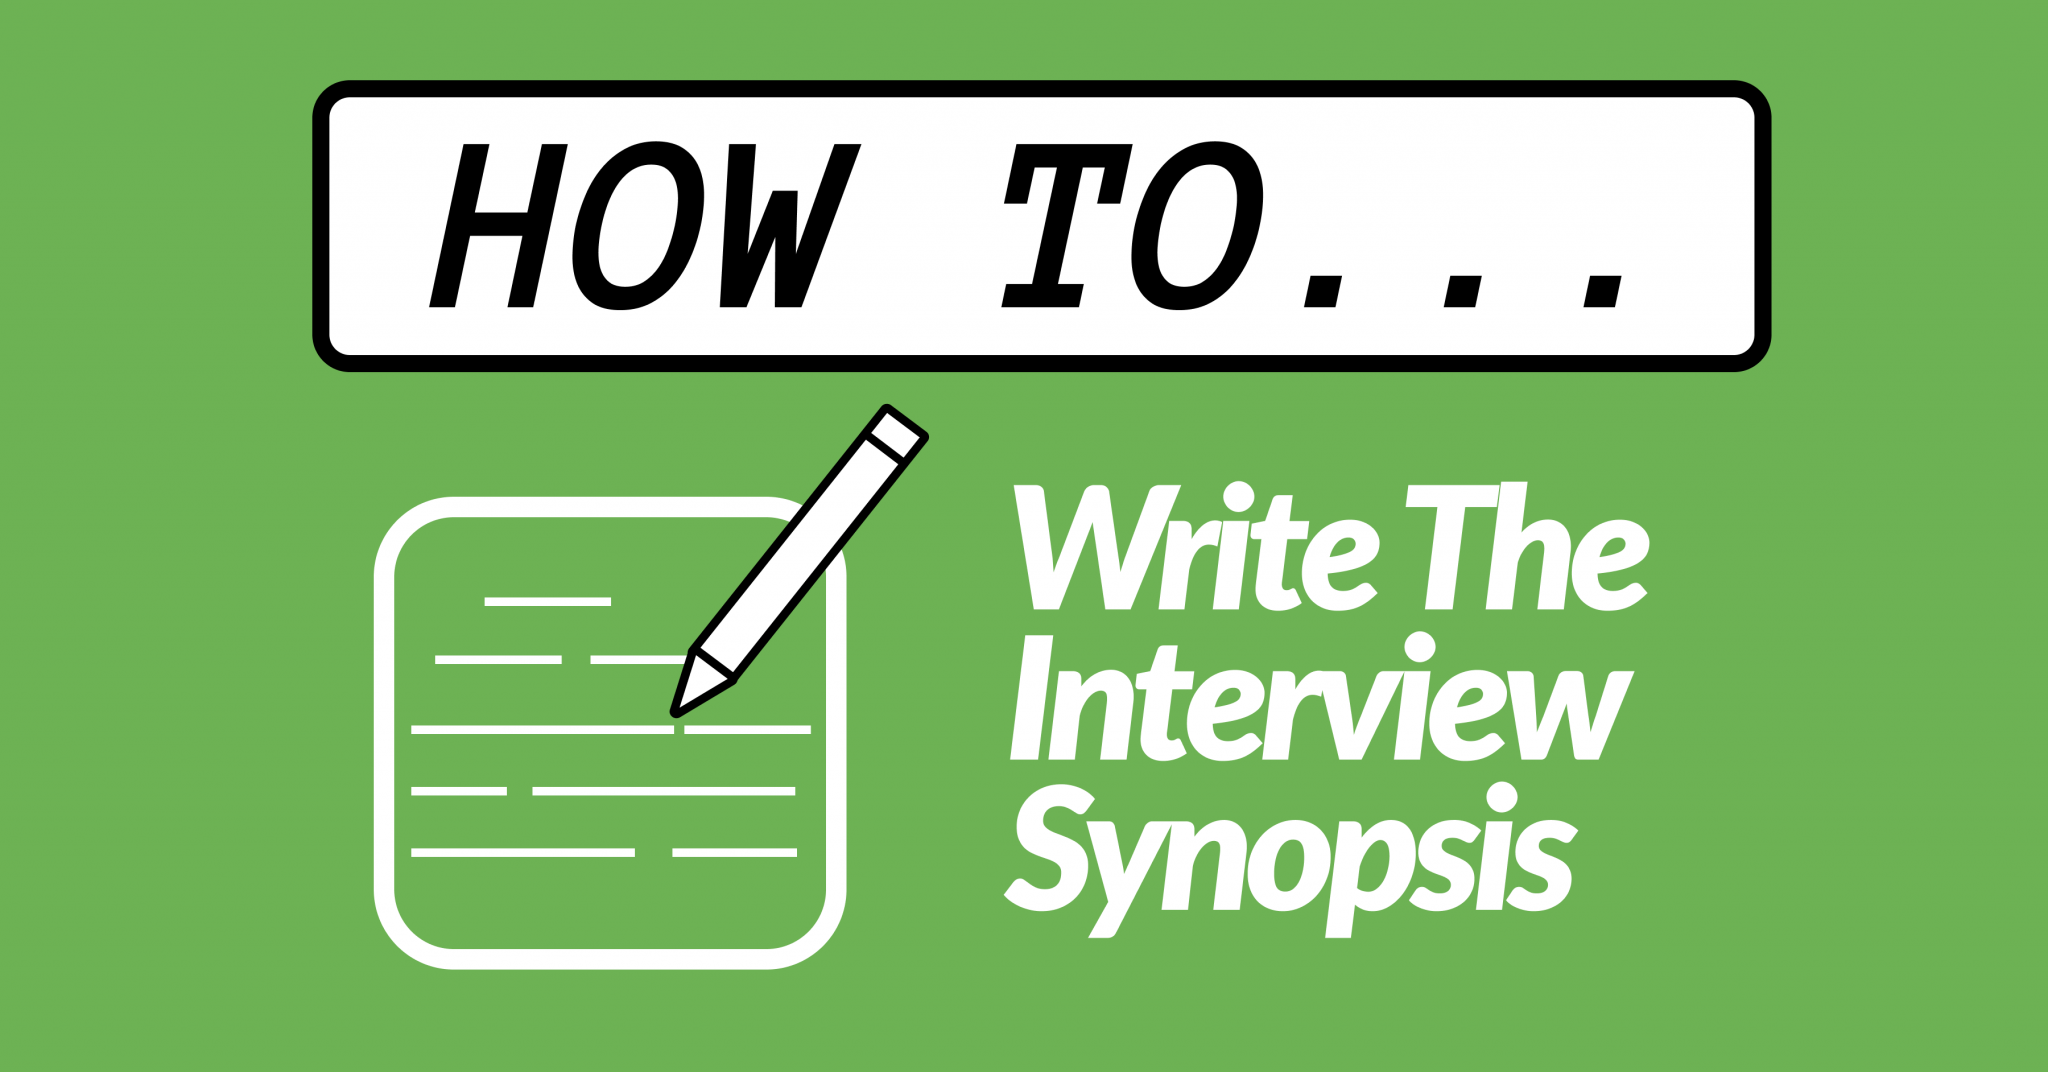 how to write synopsis for phd interview